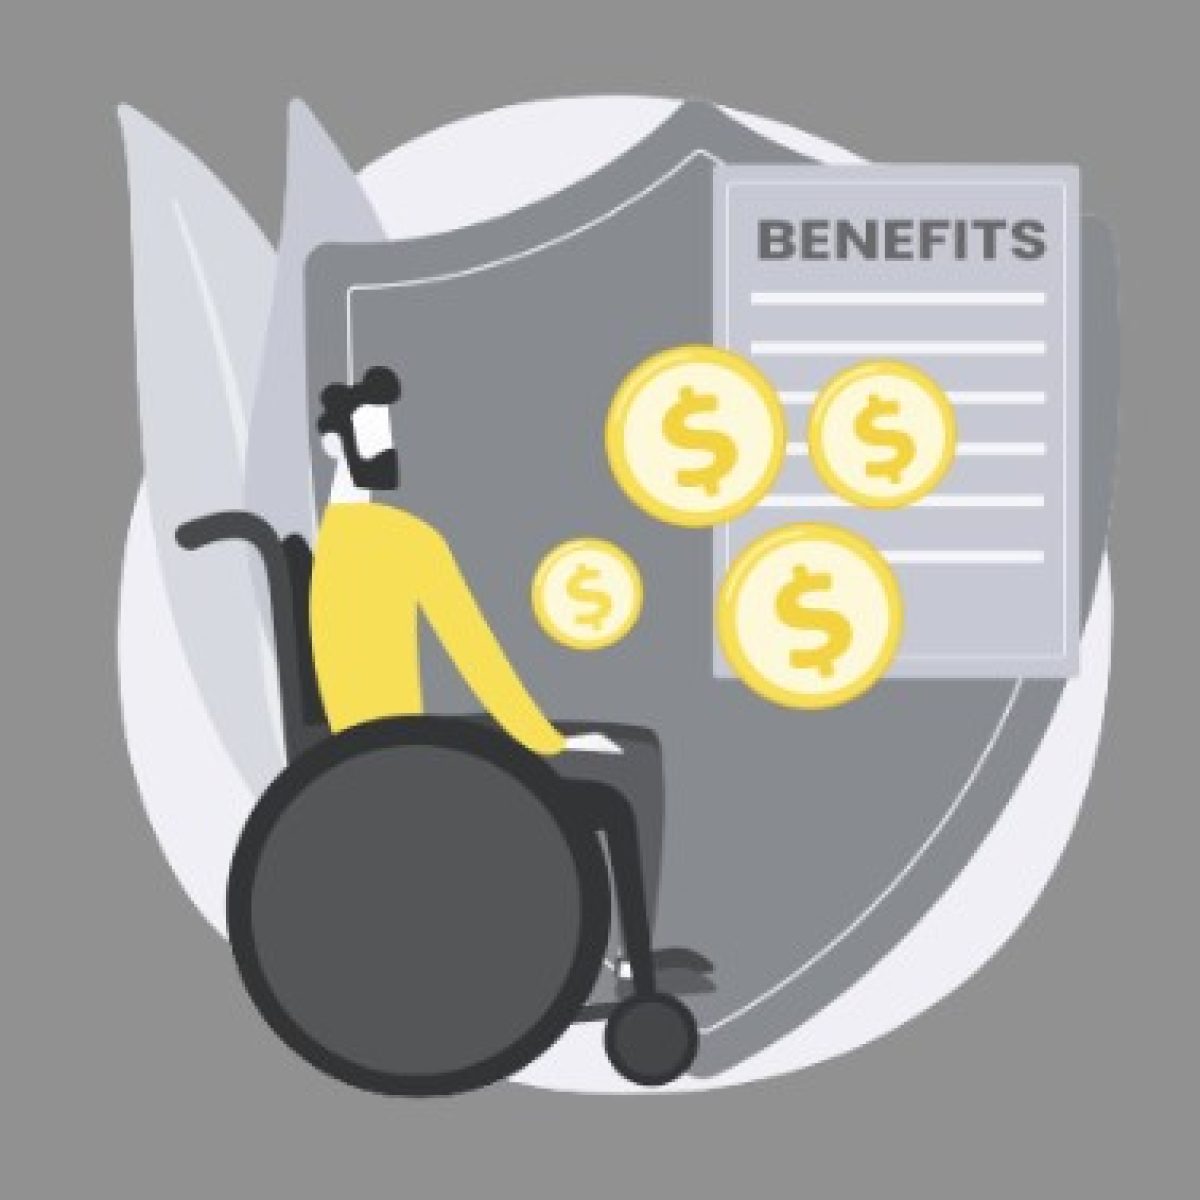 Benefits of the Disability Tax Credit